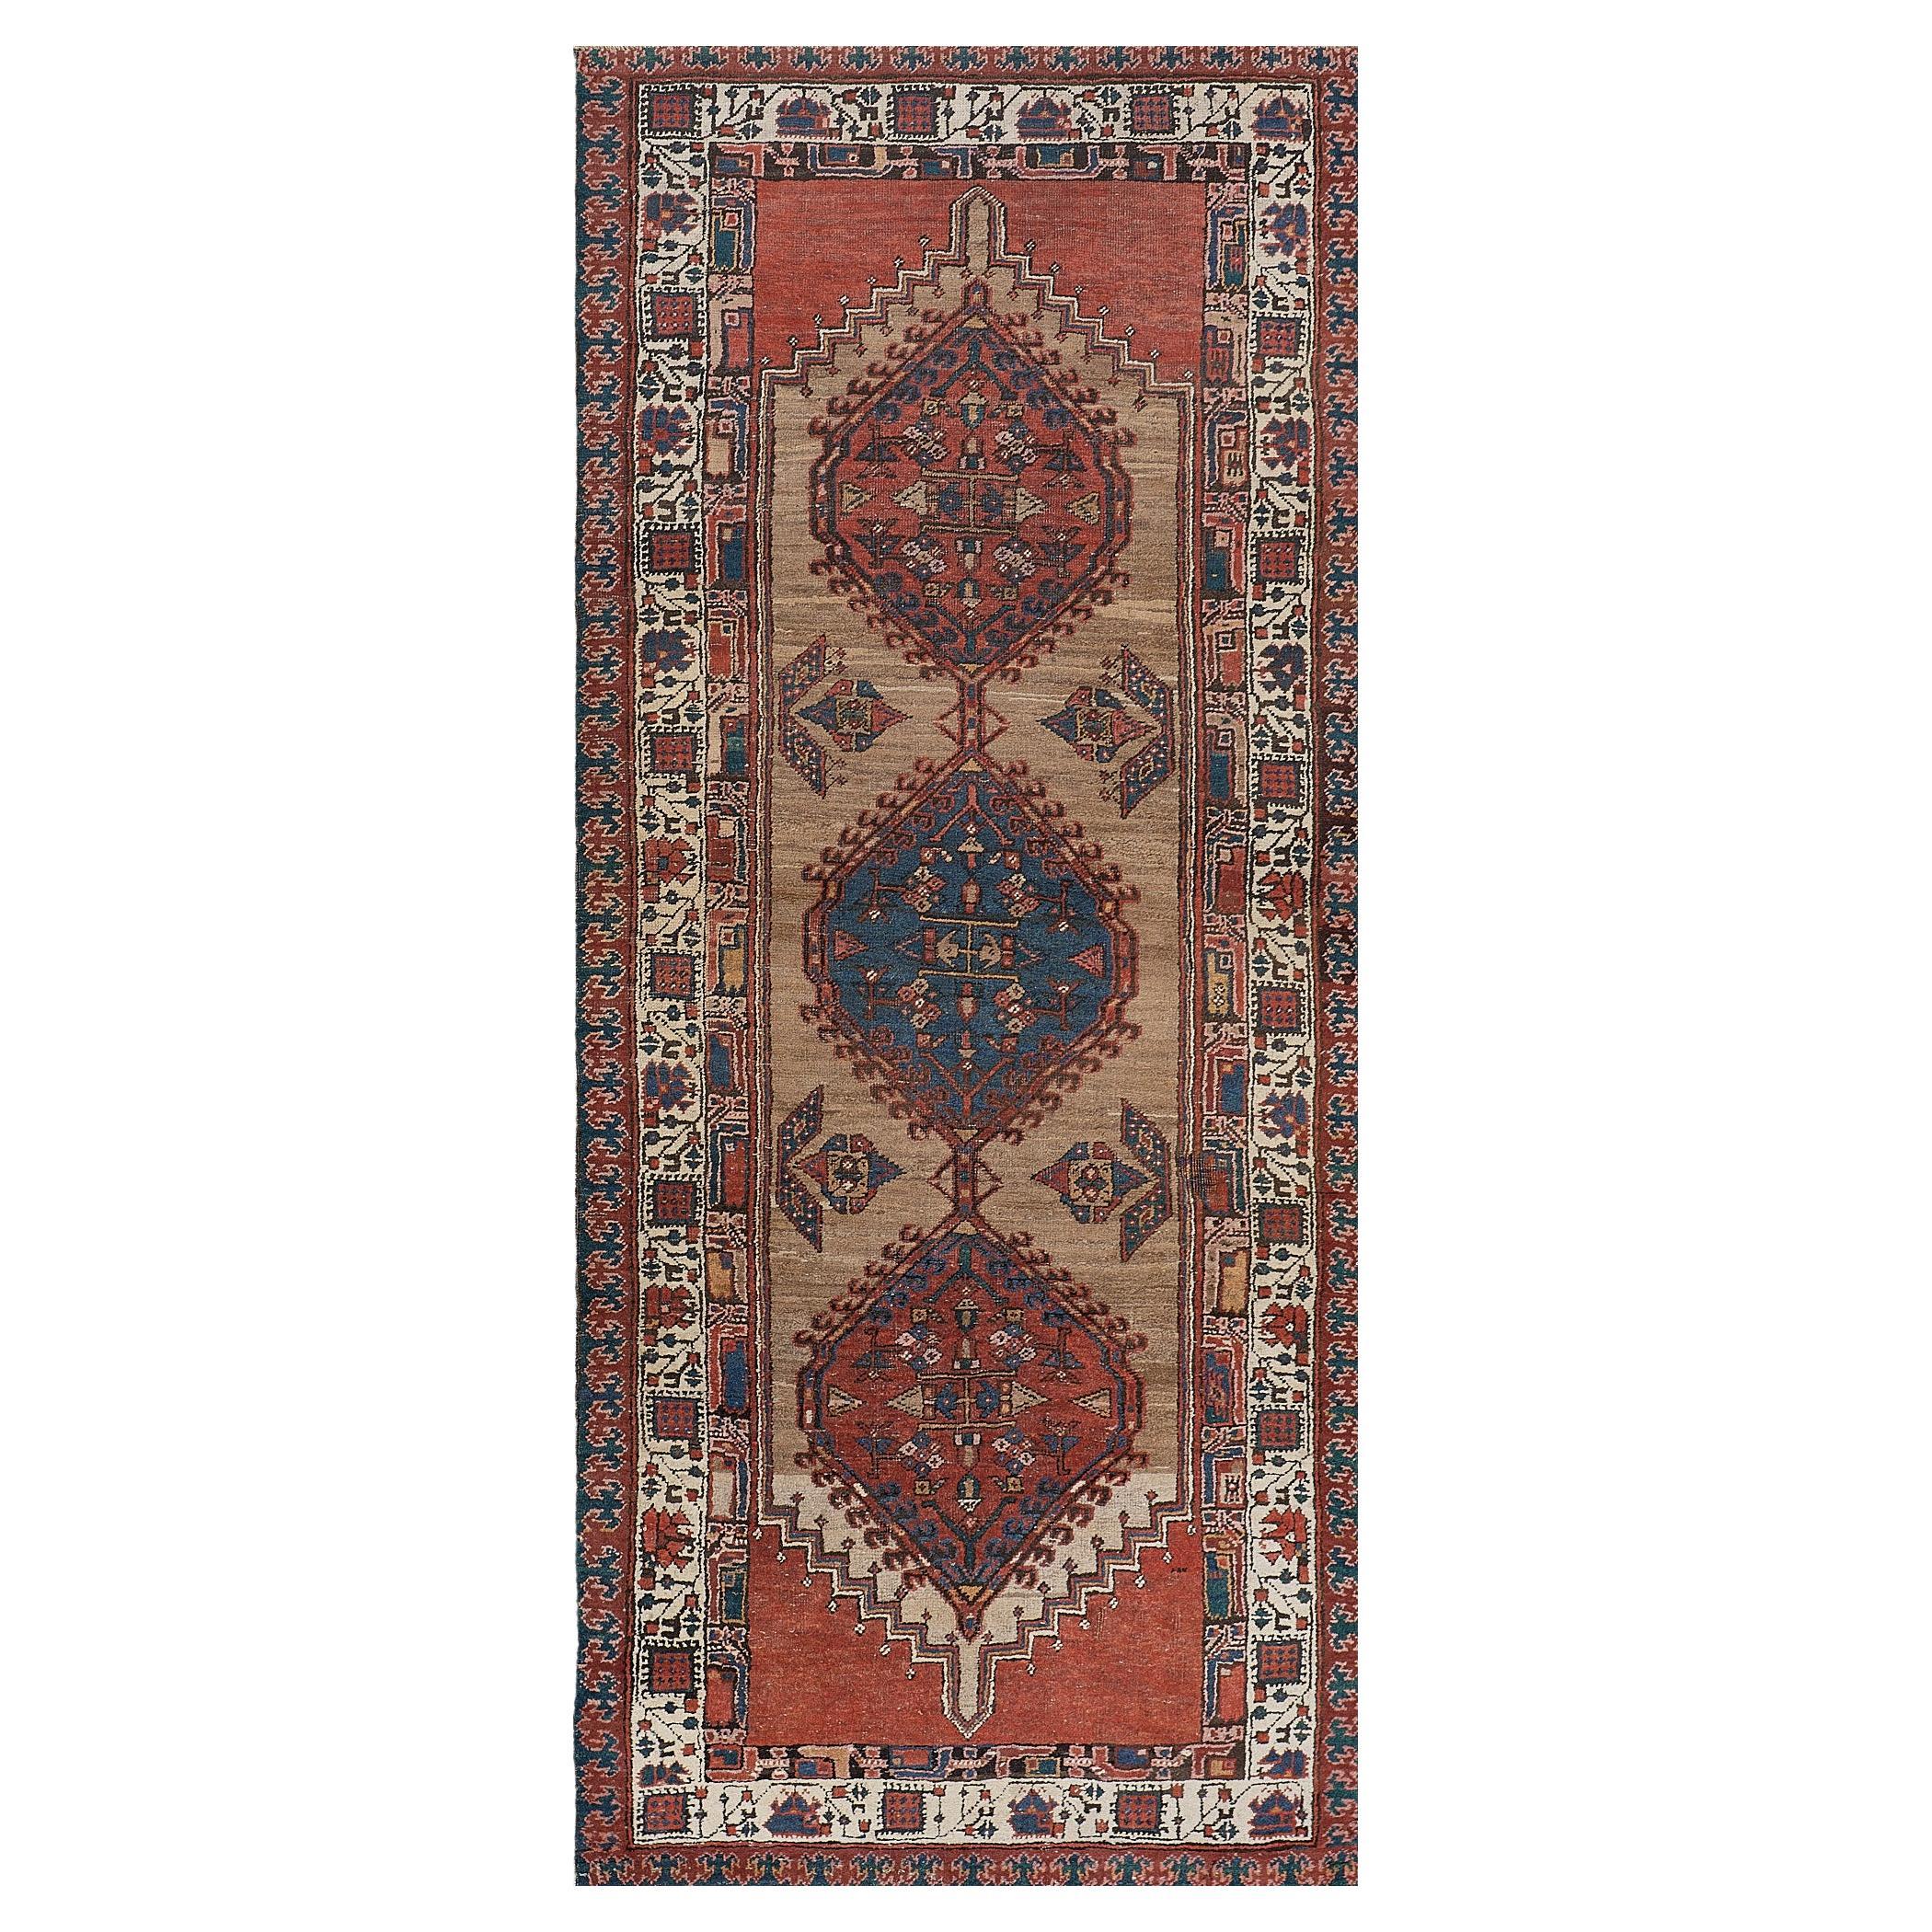 Wool Antique Hand-knotted Persian Serab Runner